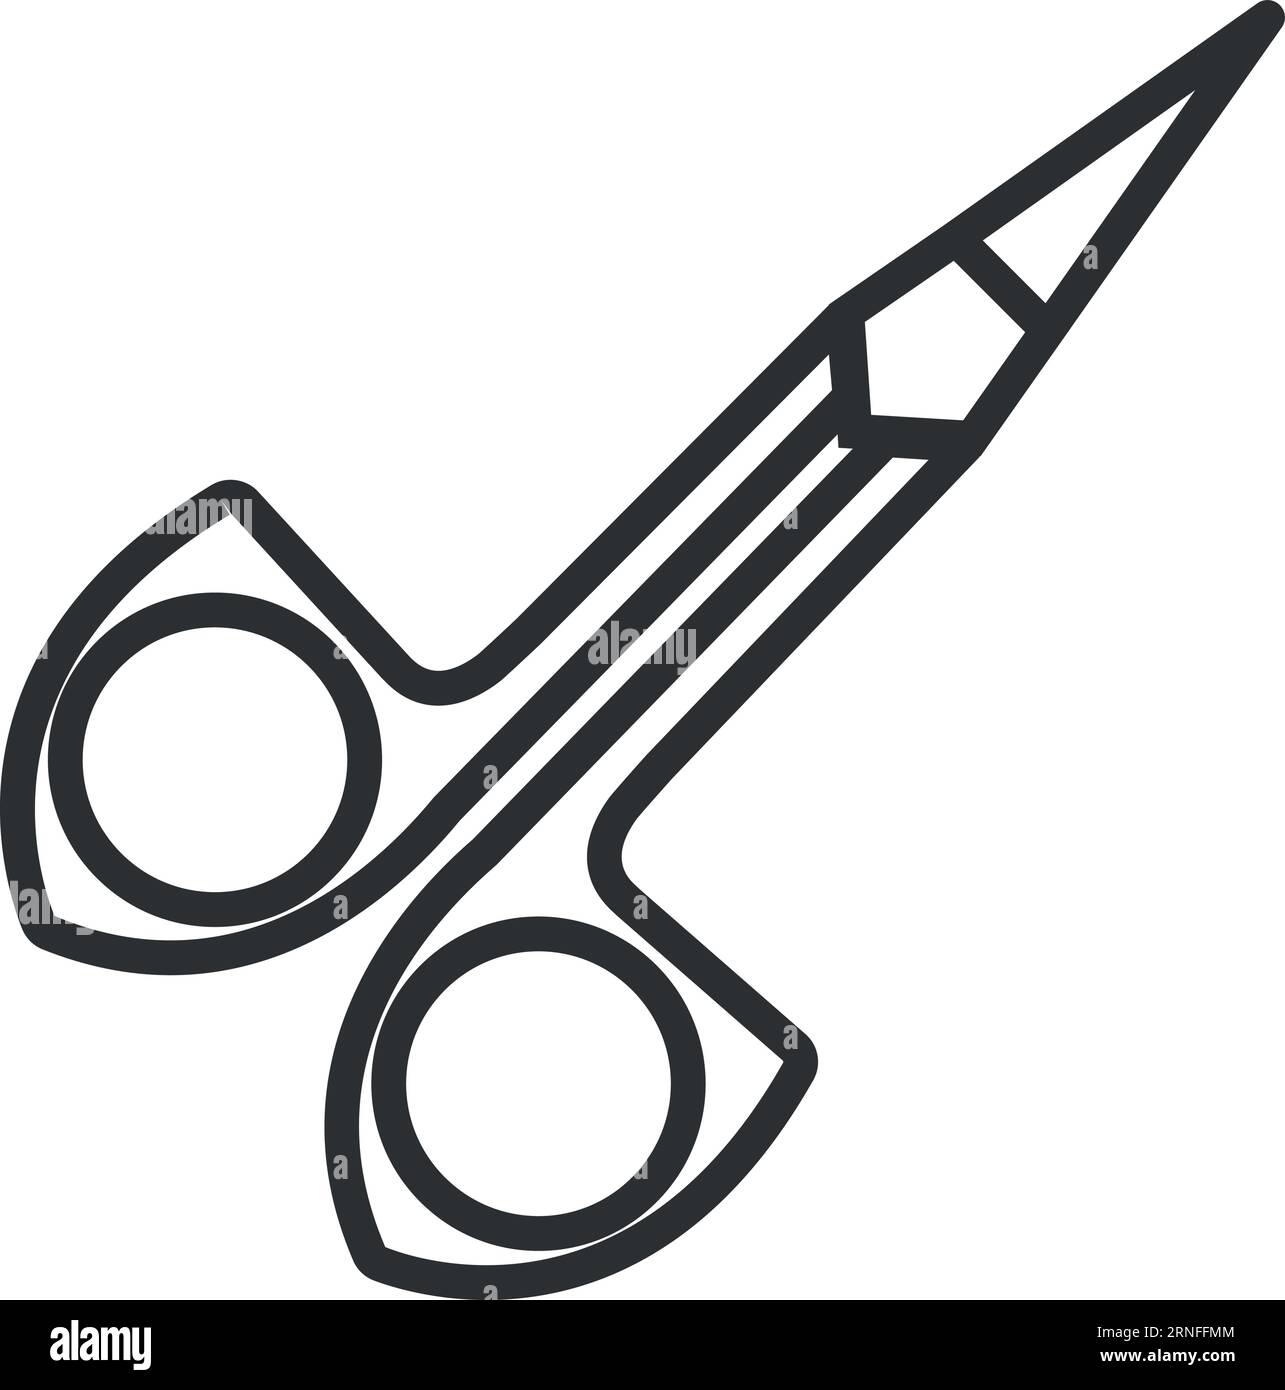 Manicure scissors icon. Nail cutting tool symbol Stock Vector